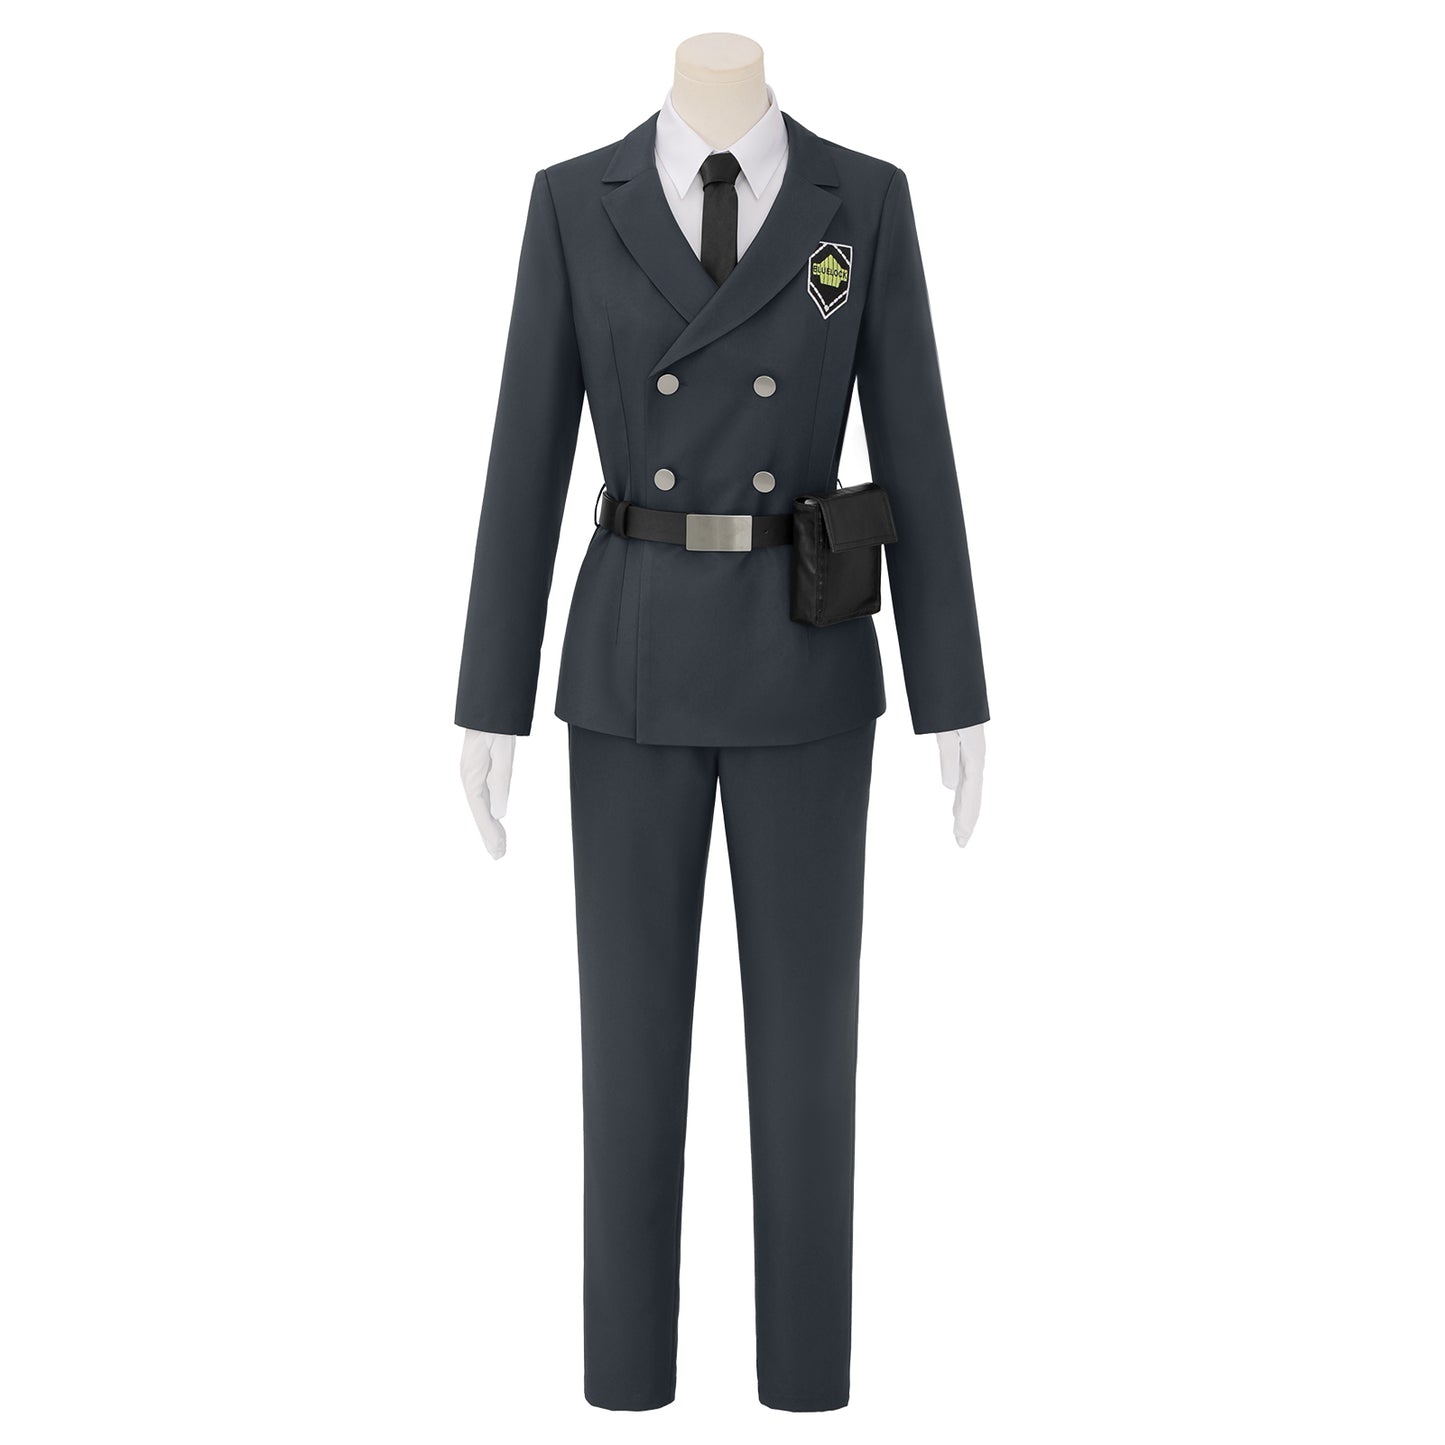 BLUE LOCK Rin Itoshi Cosplay Costume Police Guard Costume Uniform Suit Full Sets